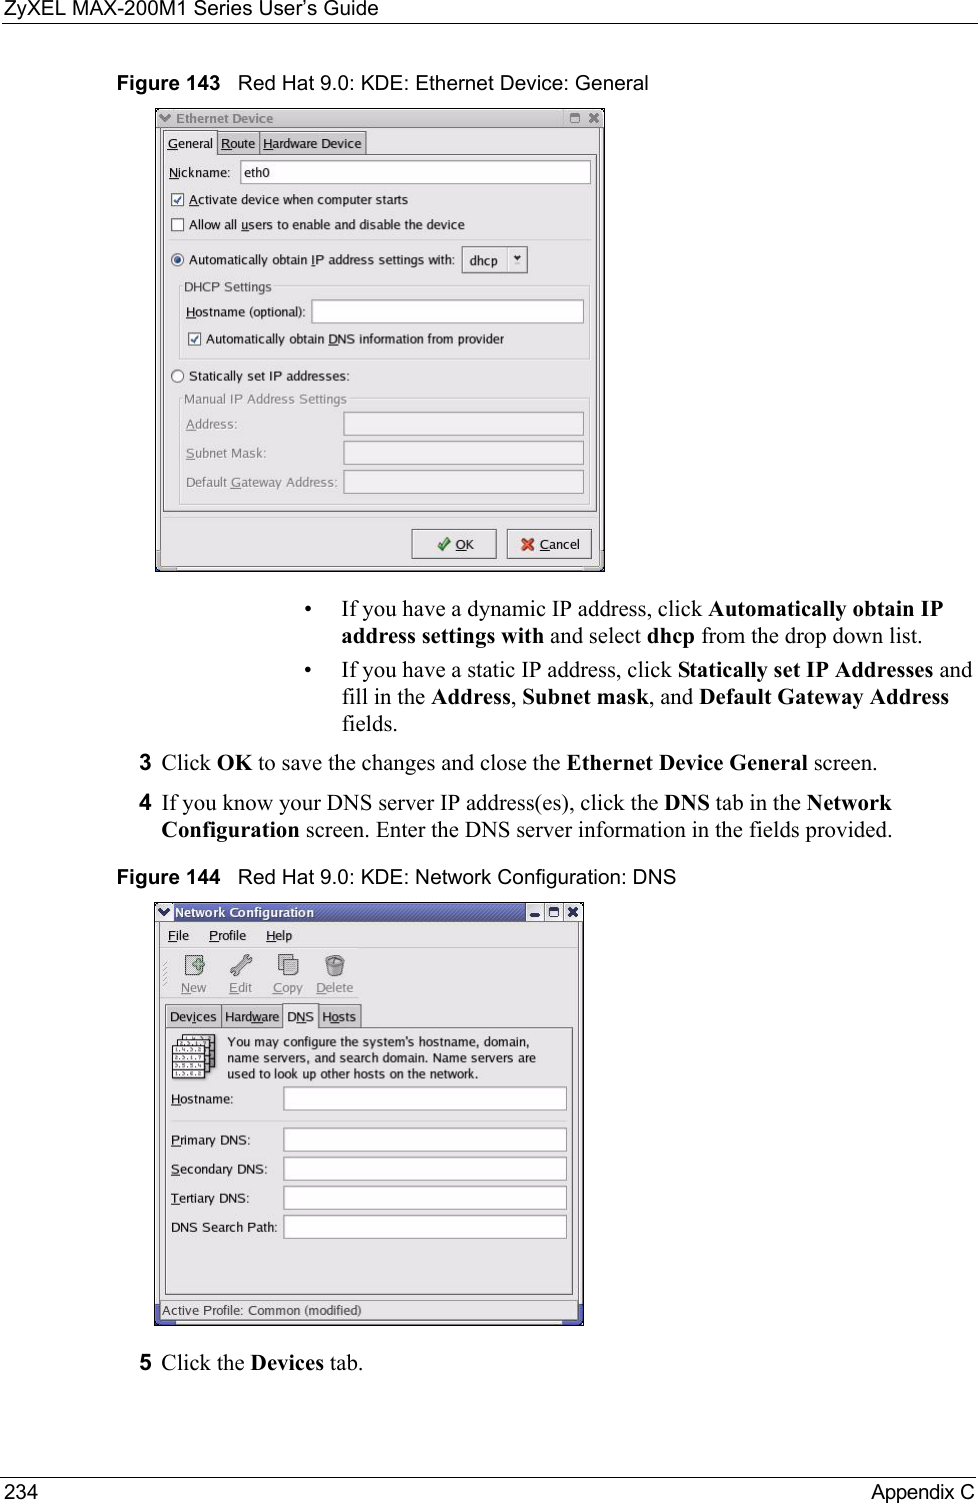 ZyXEL MAX-200M1 Series User’s Guide234 Appendix CFigure 143   Red Hat 9.0: KDE: Ethernet Device: General • If you have a dynamic IP address, click Automatically obtain IP address settings with and select dhcp from the drop down list. • If you have a static IP address, click Statically set IP Addresses and fill in the Address, Subnet mask, and Default Gateway Address fields. 3Click OK to save the changes and close the Ethernet Device General screen. 4If you know your DNS server IP address(es), click the DNS tab in the Network Configuration screen. Enter the DNS server information in the fields provided. Figure 144   Red Hat 9.0: KDE: Network Configuration: DNS 5Click the Devices tab. 